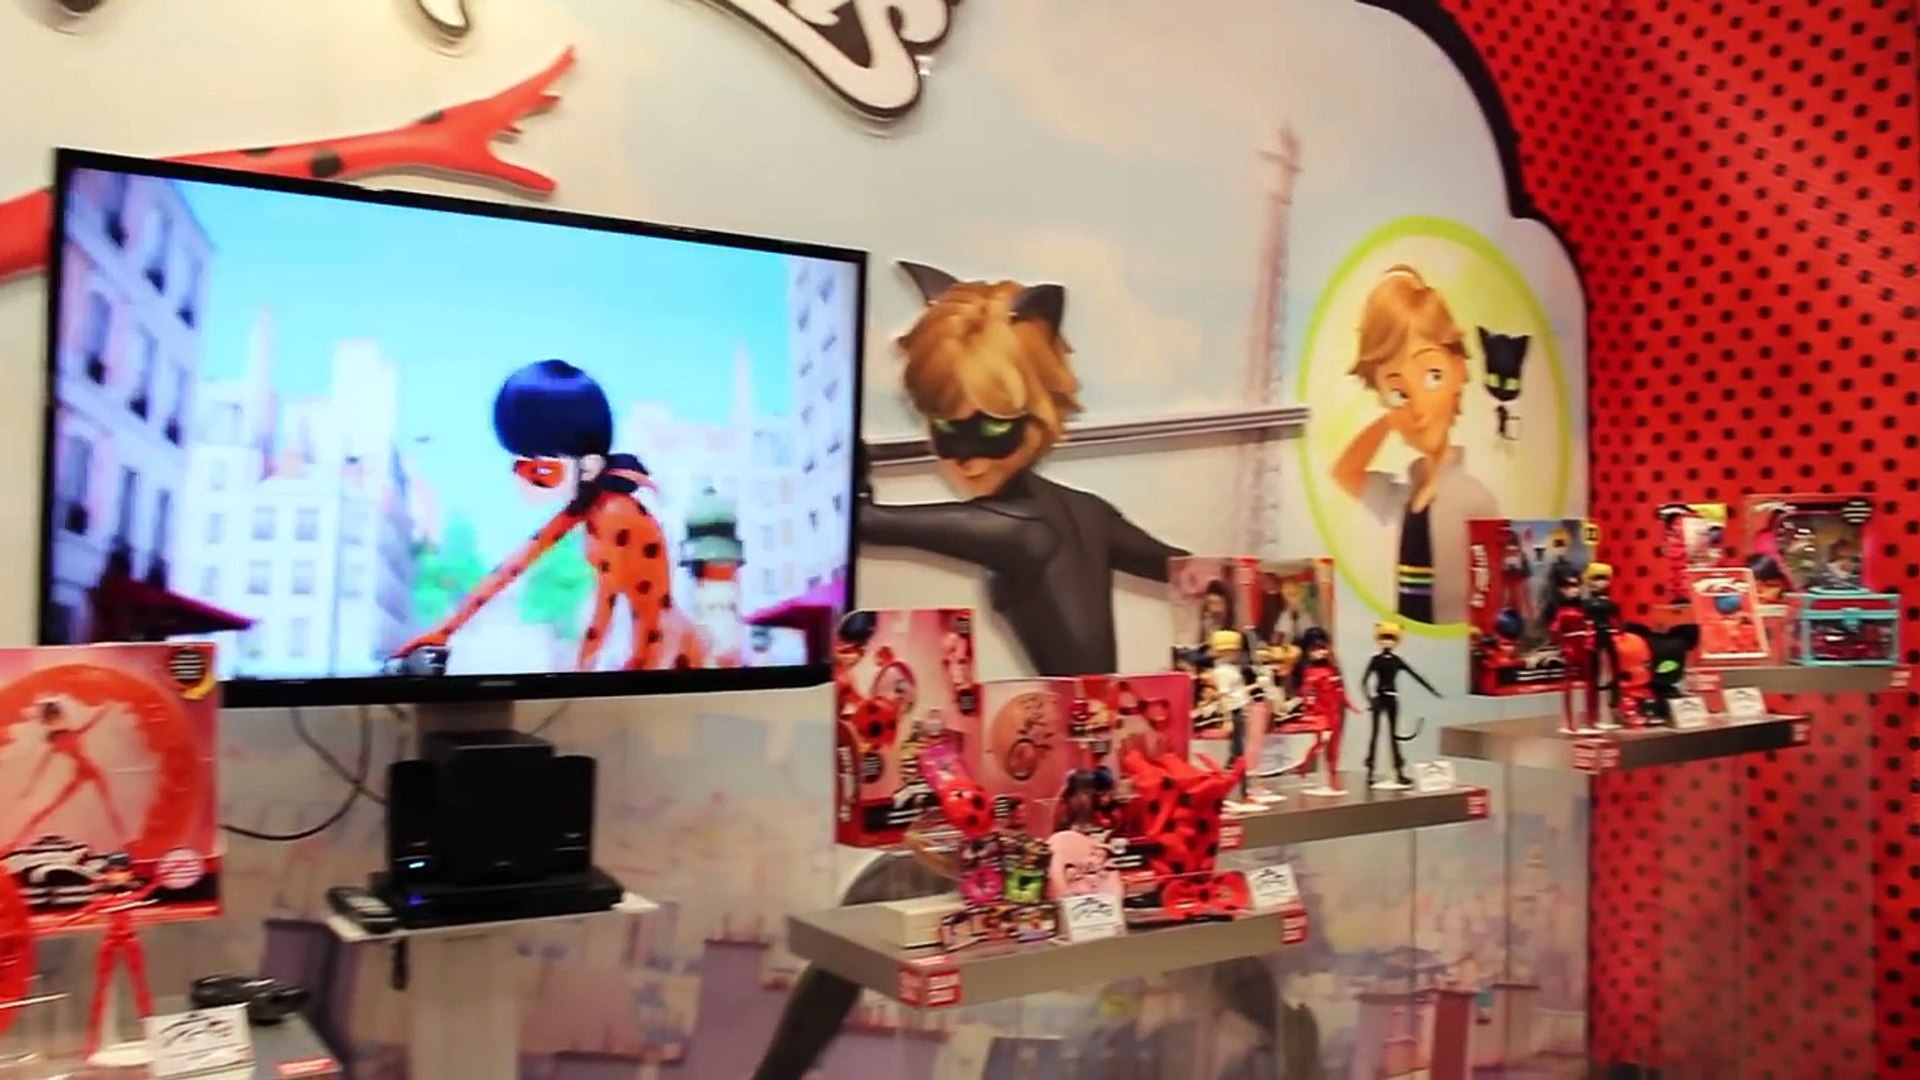 How to watch and stream Miraculous Ladybug And Cat Noir Dolls And Toys  Ladybug Anime Toy Fair 2016 Bandai - 2016 on Roku